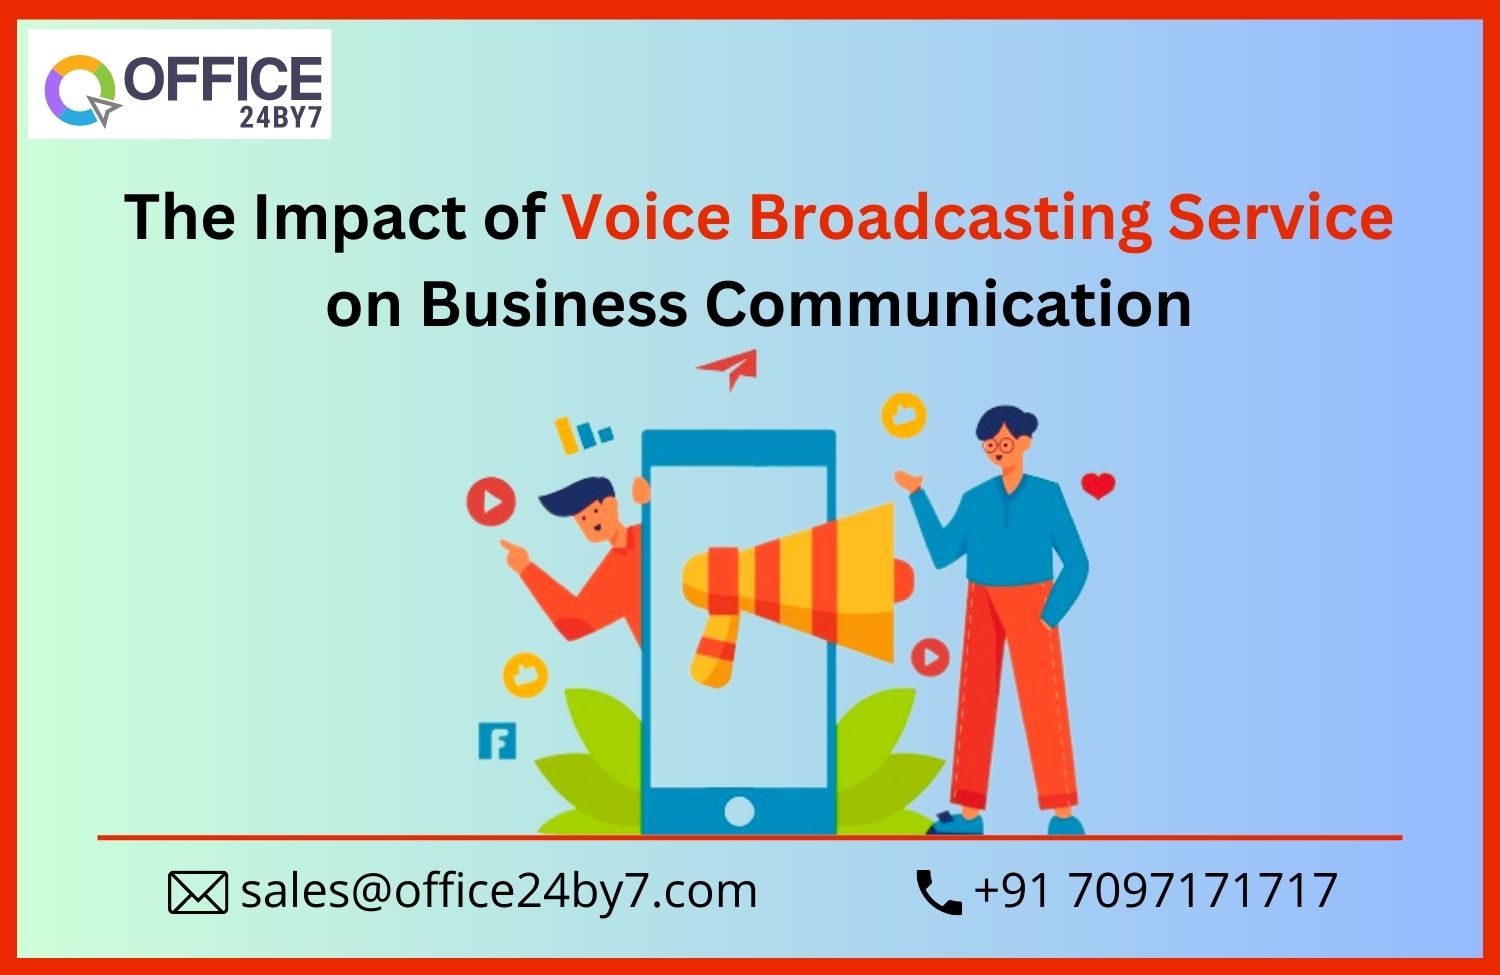 The Impact of Voice Broadcasting Service on Business Communication